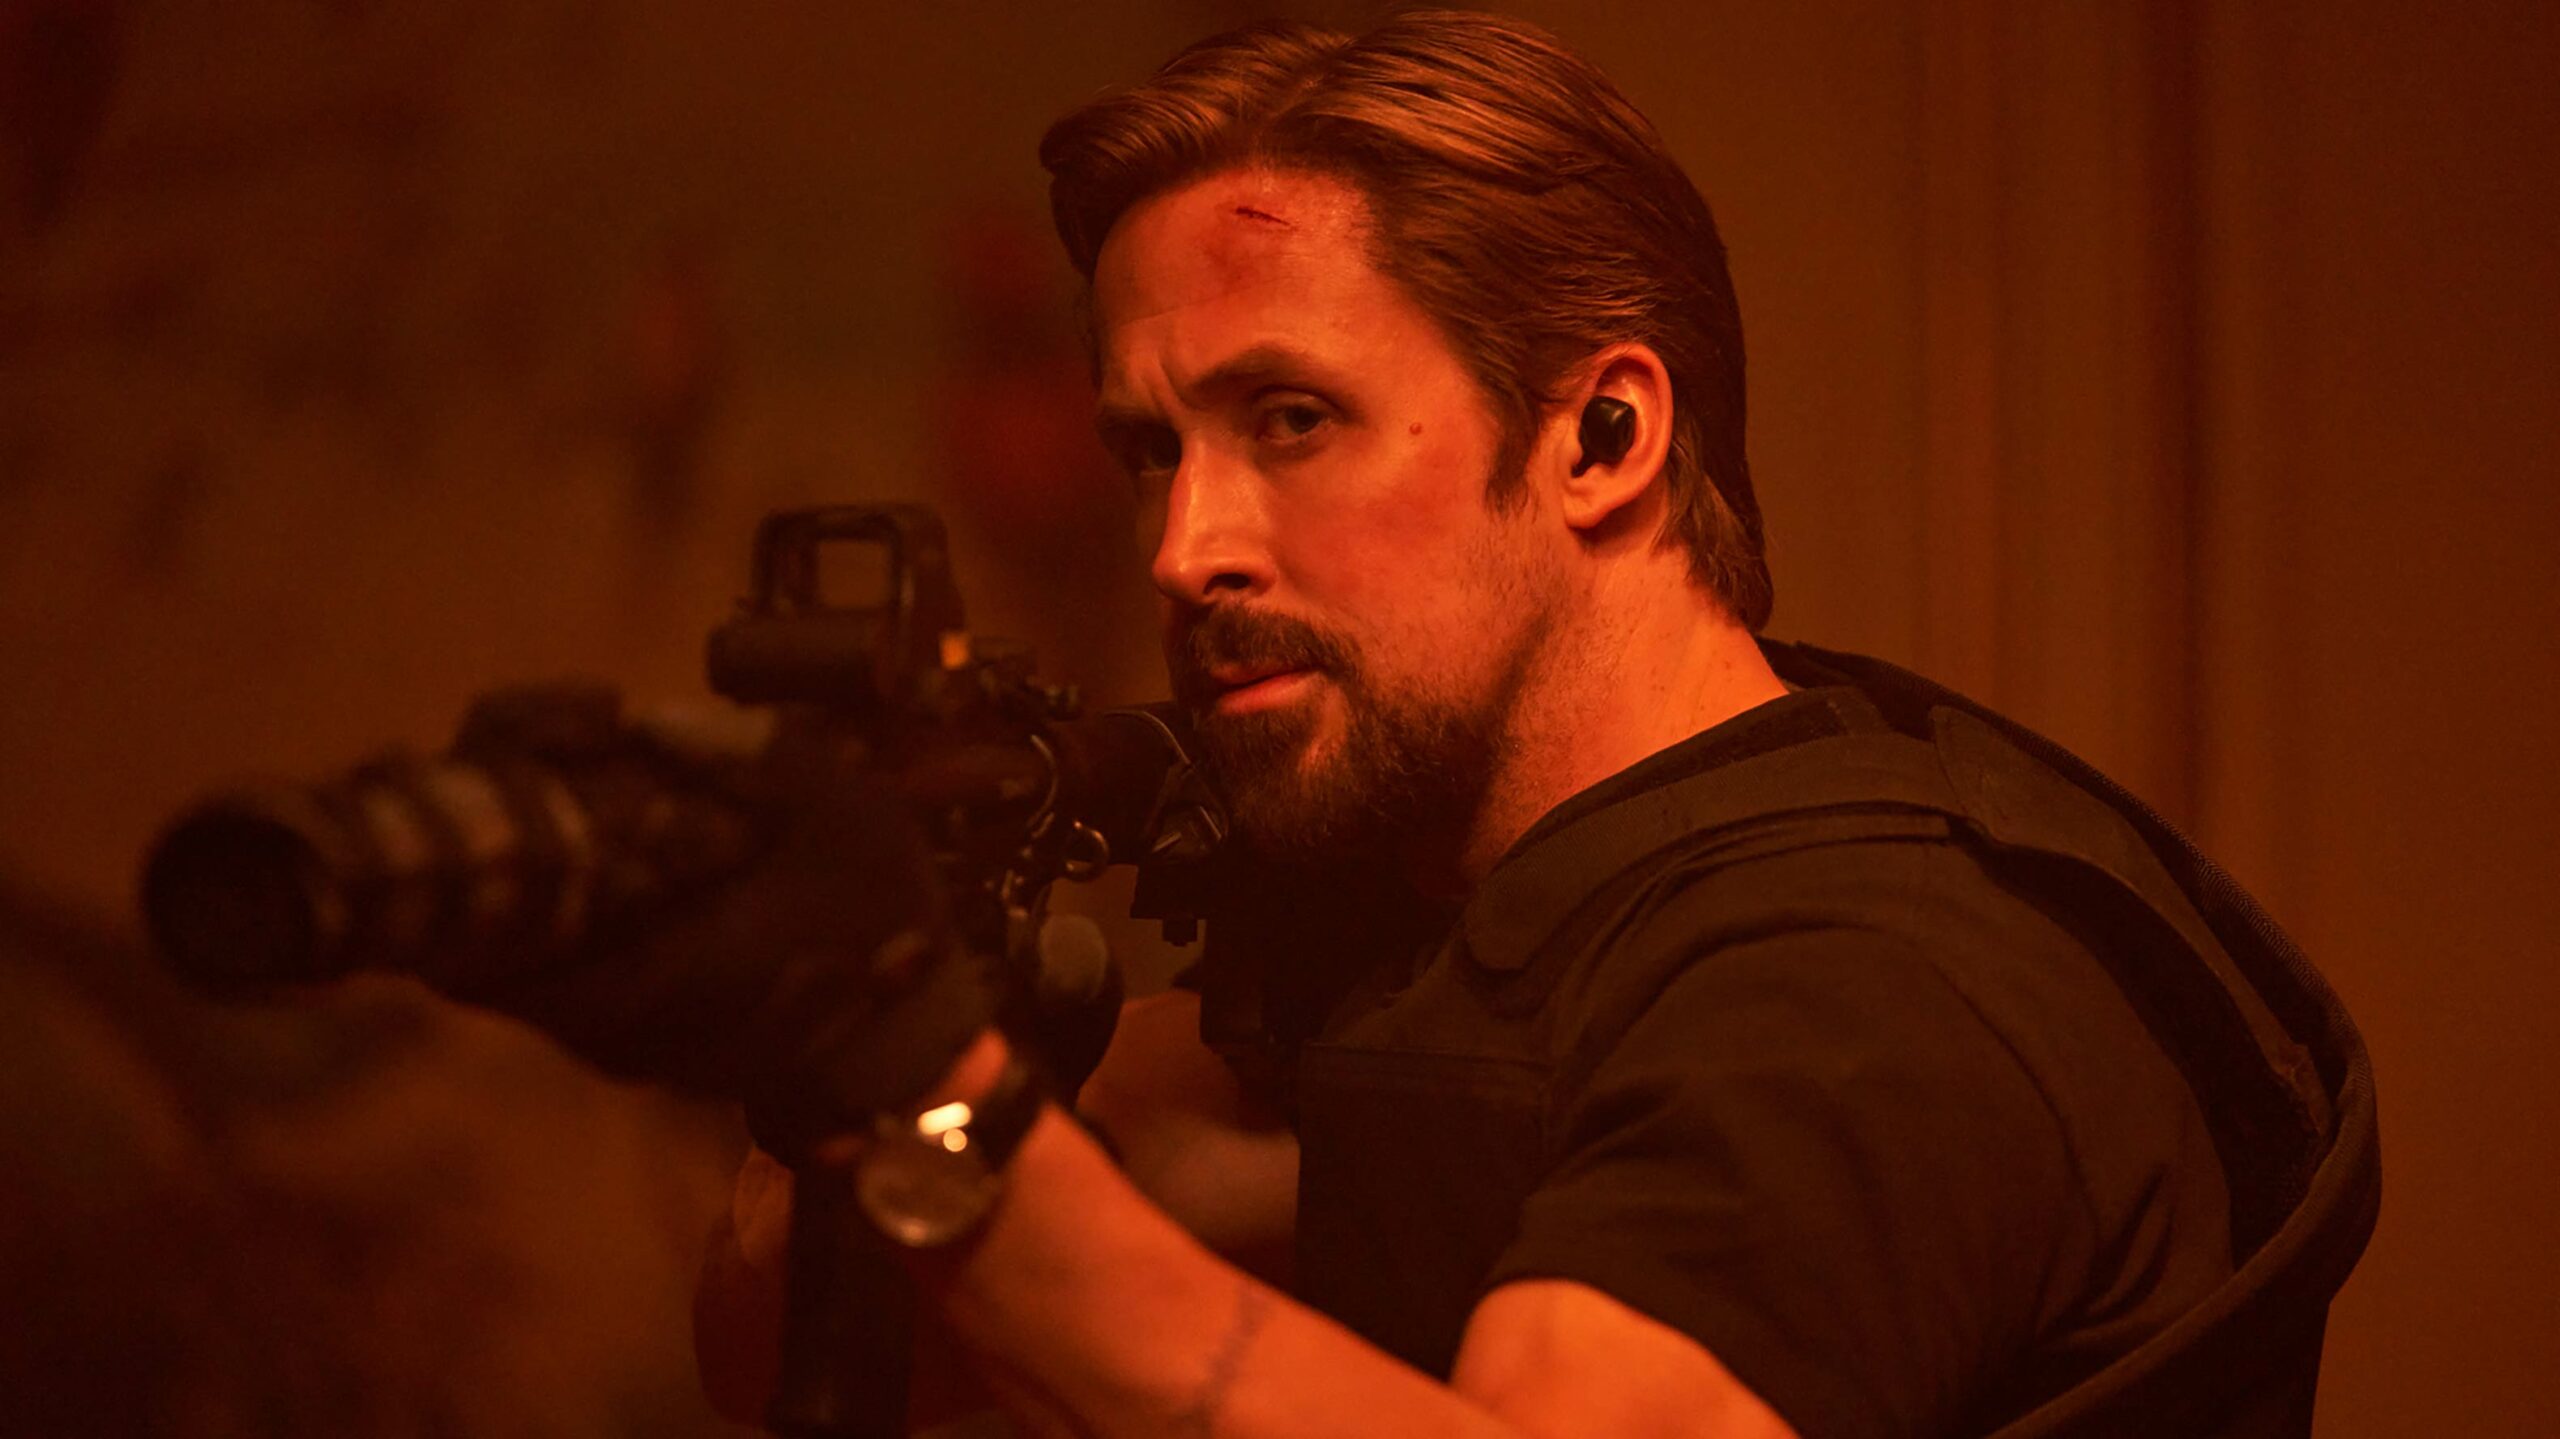 A bearded Ryan Gosling aims a rifle in the Netflix film, The Gray Man